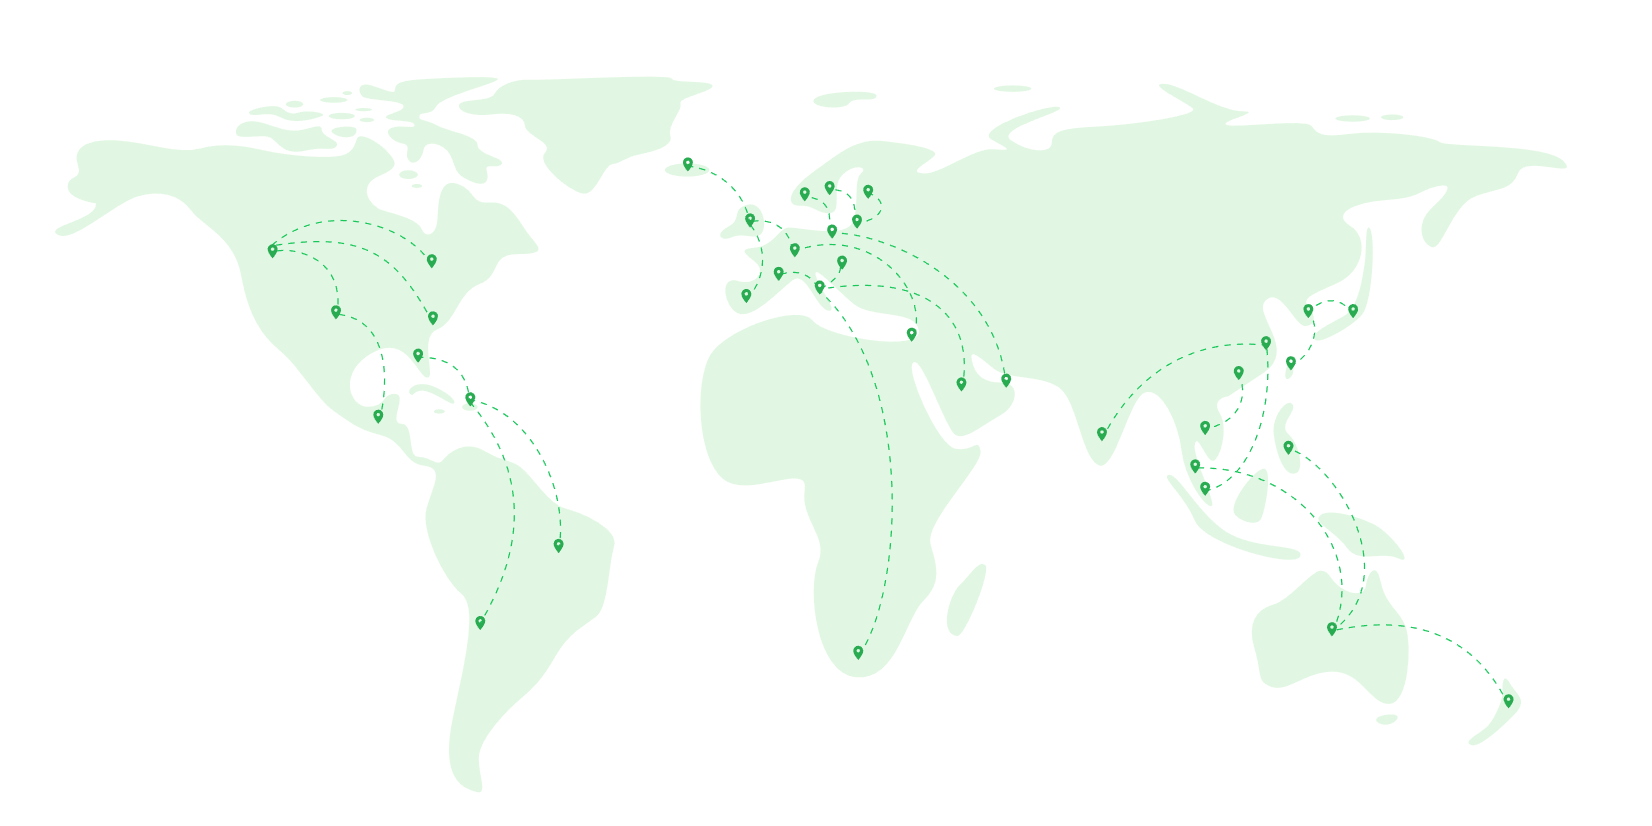 A graphic from Printify’s website showing its expansive network of global print partners